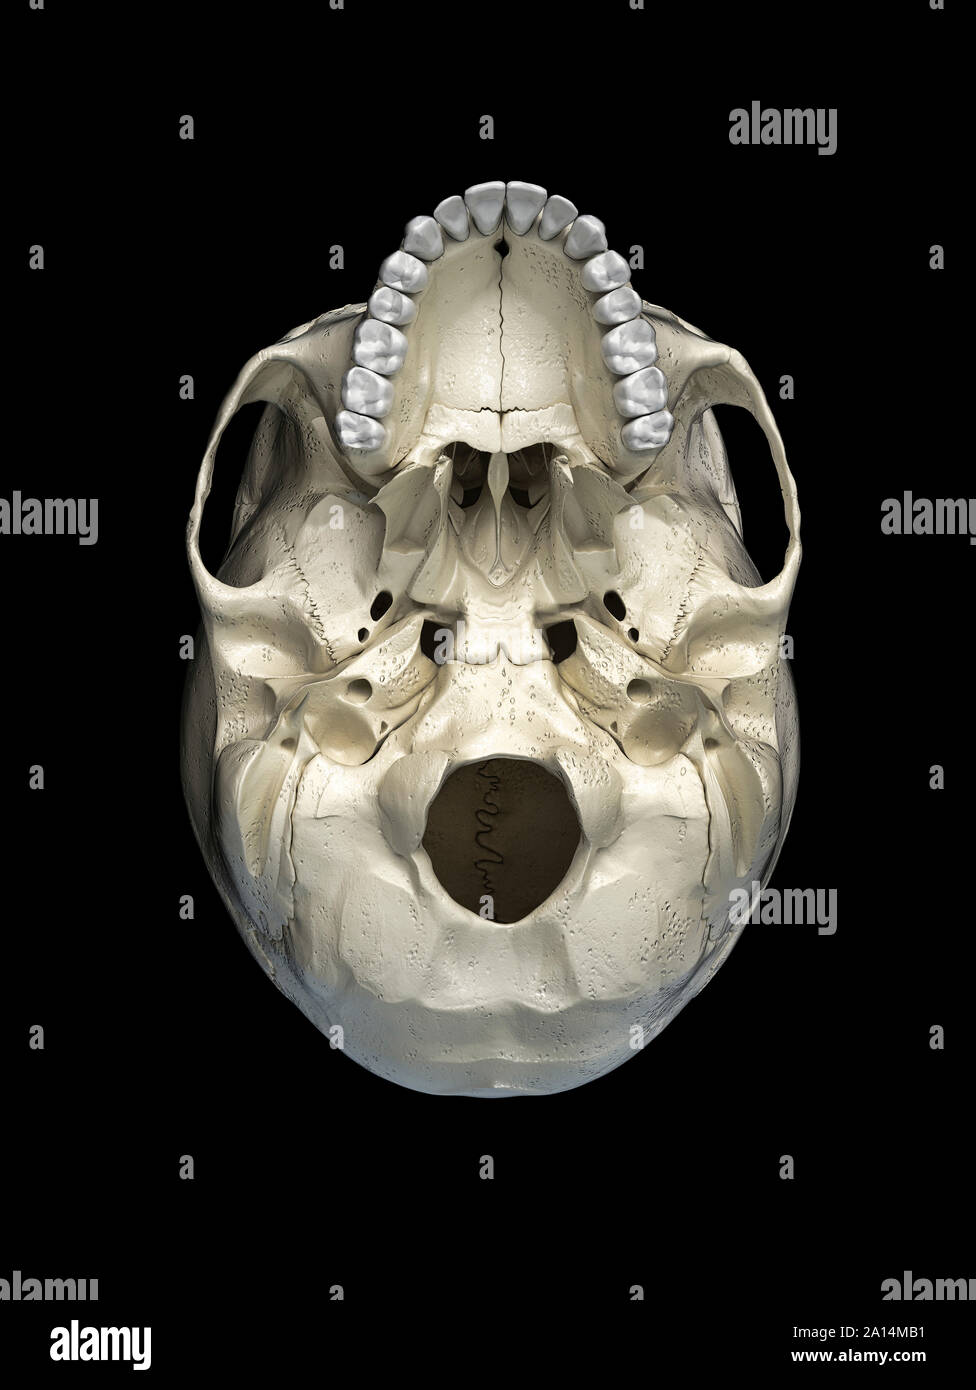 Human skull viewed from the bottom, on black background. Stock Photo